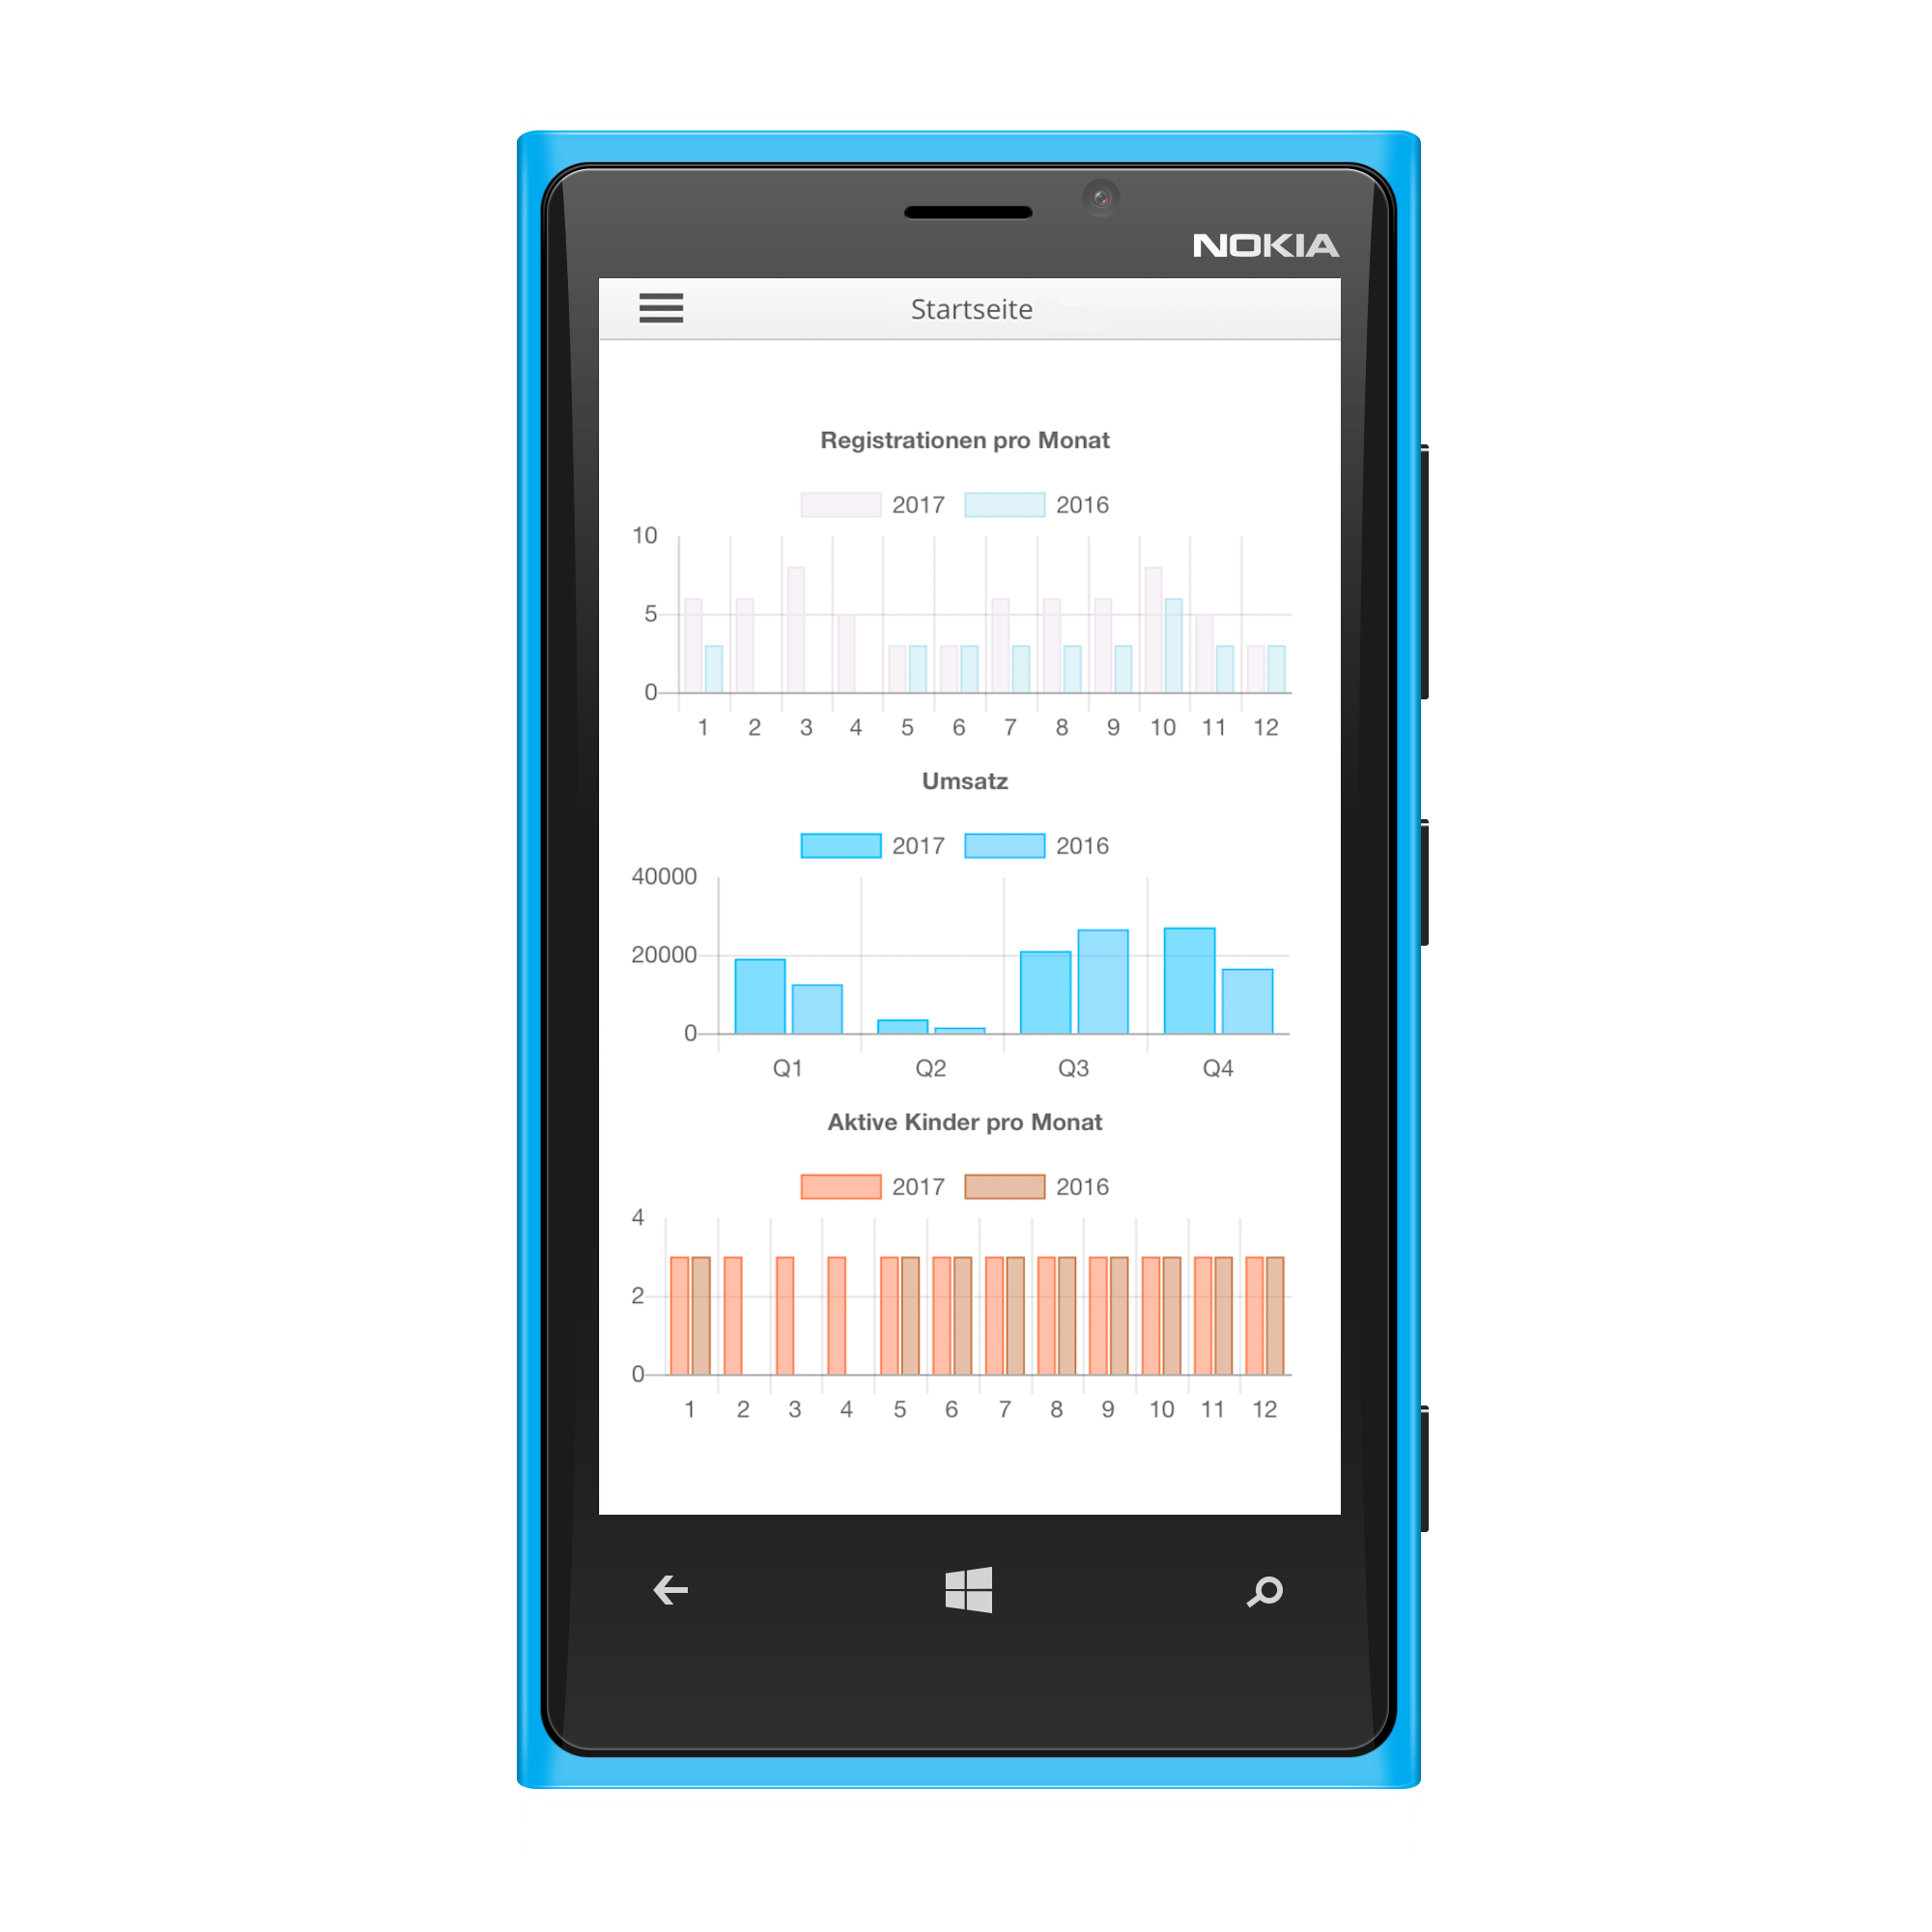 A sample of a Protogrid business application used for reporting on a Windows Phone.